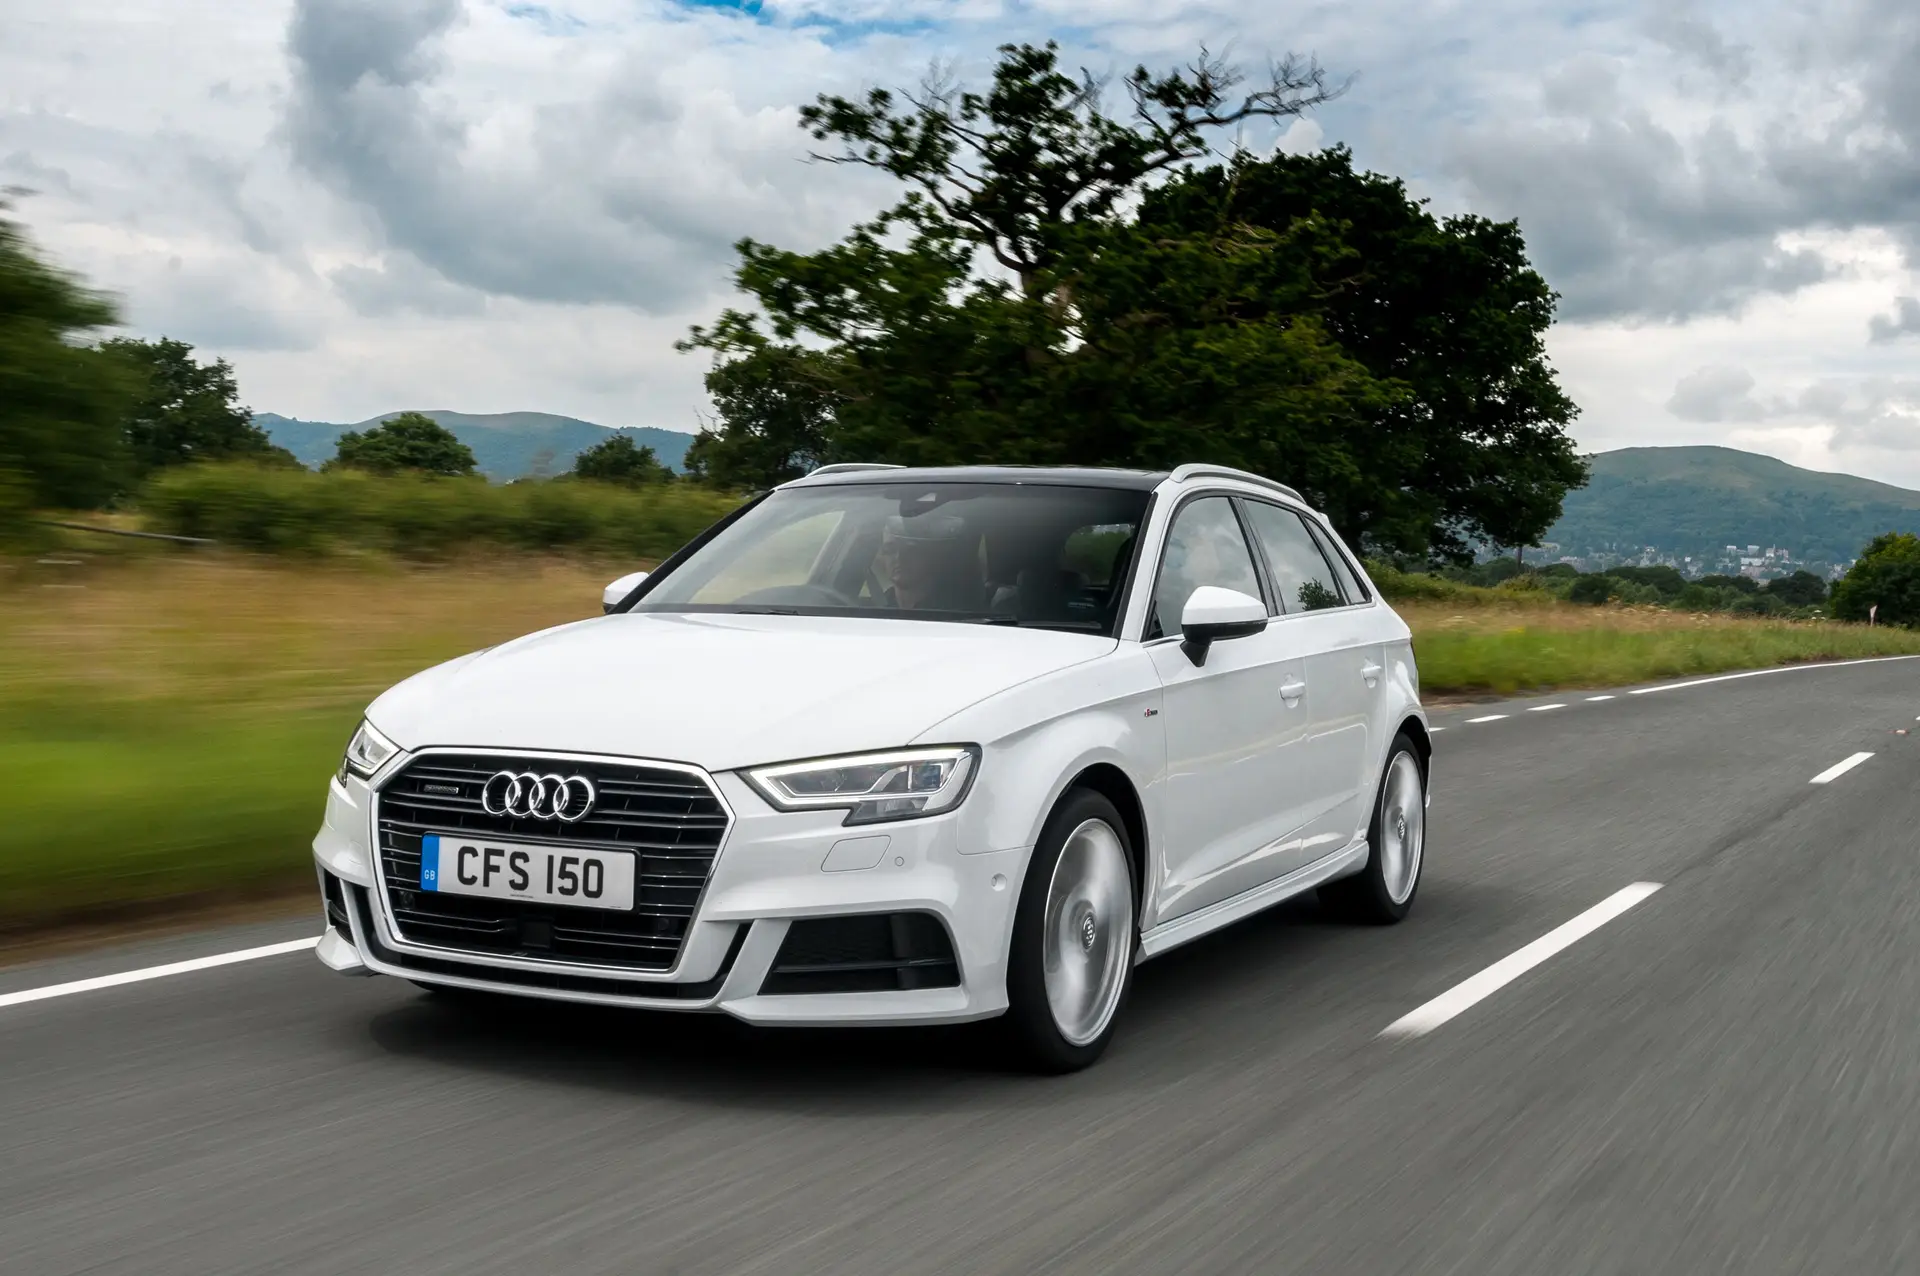 Audi A3 Sportback (2013-2020) Review: exterior front three quarter photo of the Audi A3 Sportback on the road